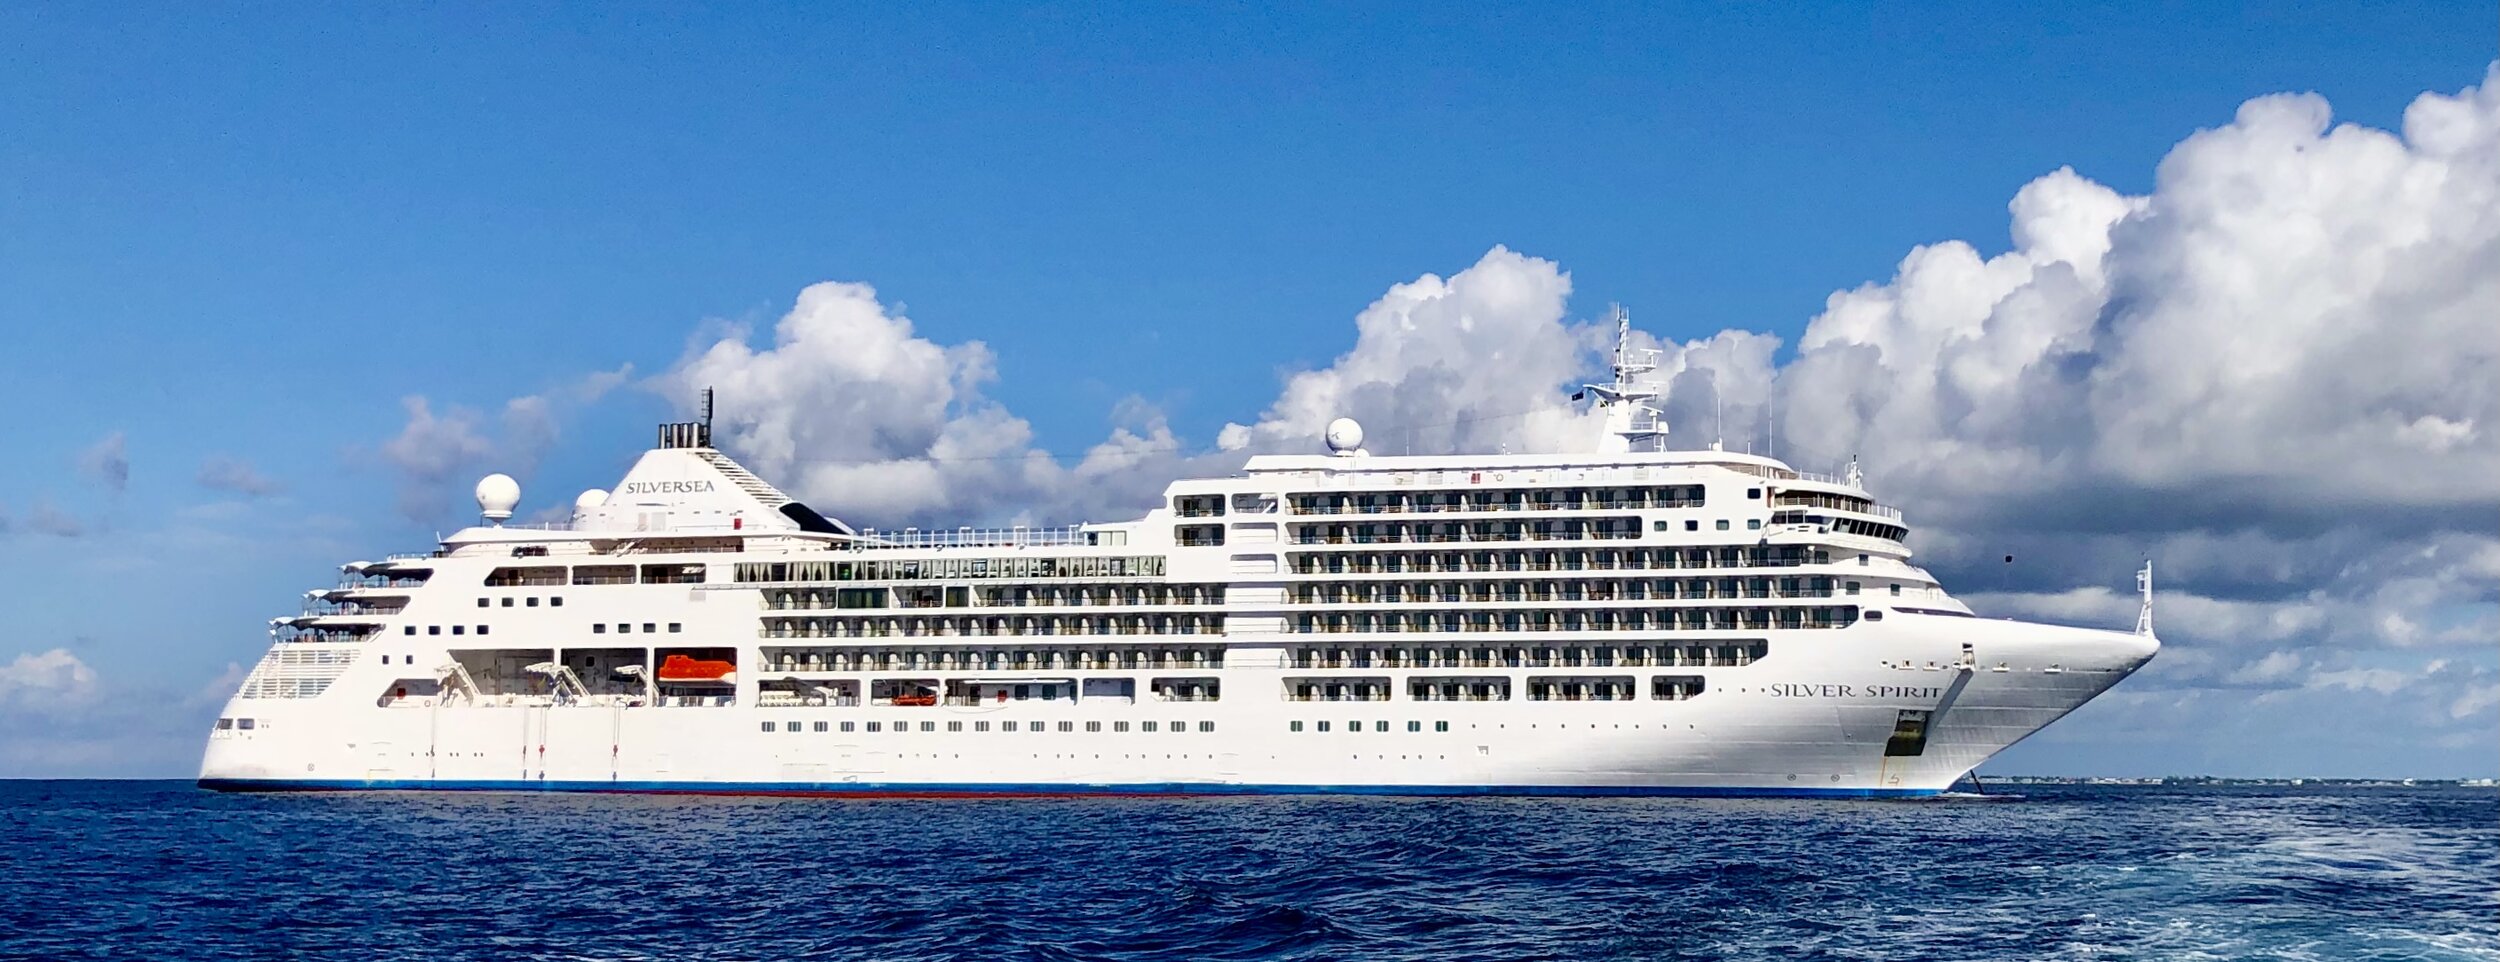 The 608 passenger Silver Spirit in the Cayman Islands